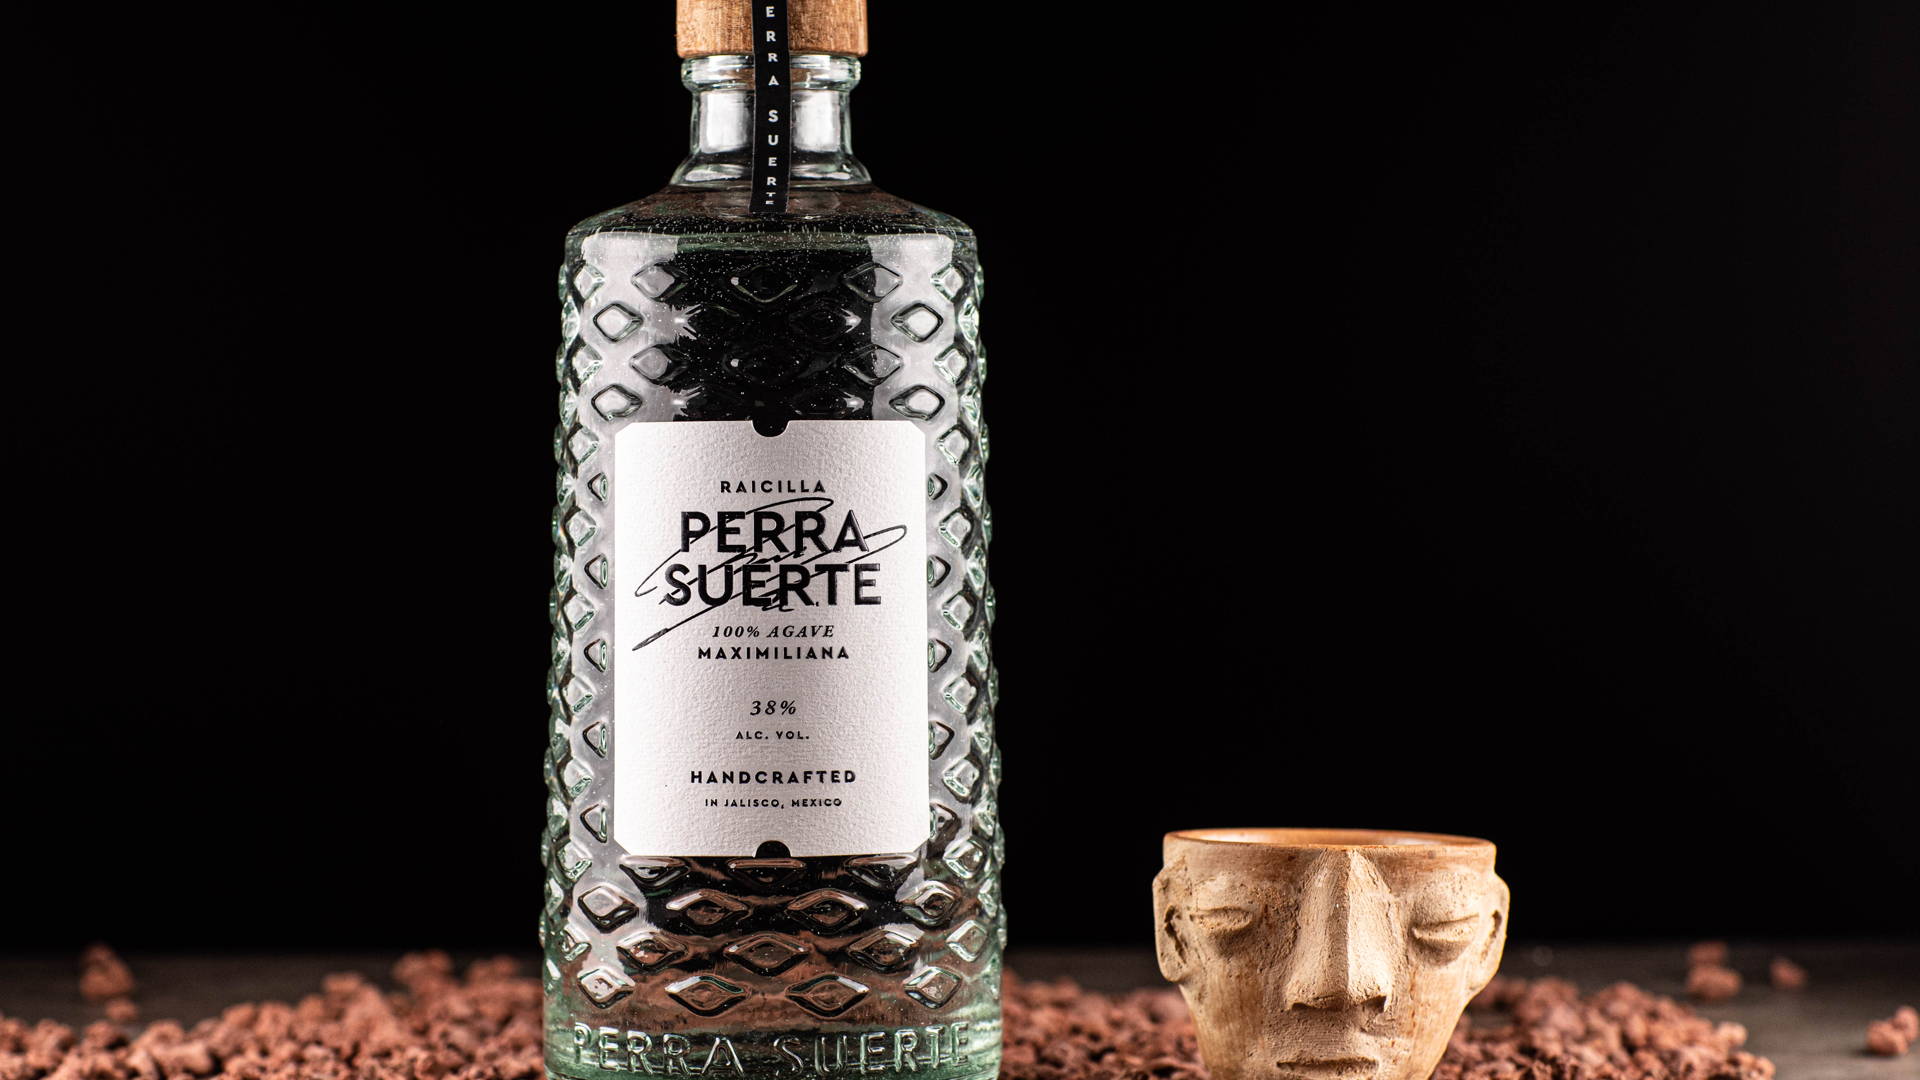 Featured image for The Duality Of Mexican Culture Is Represented Through Raicilla Perra Suerte's Packaging